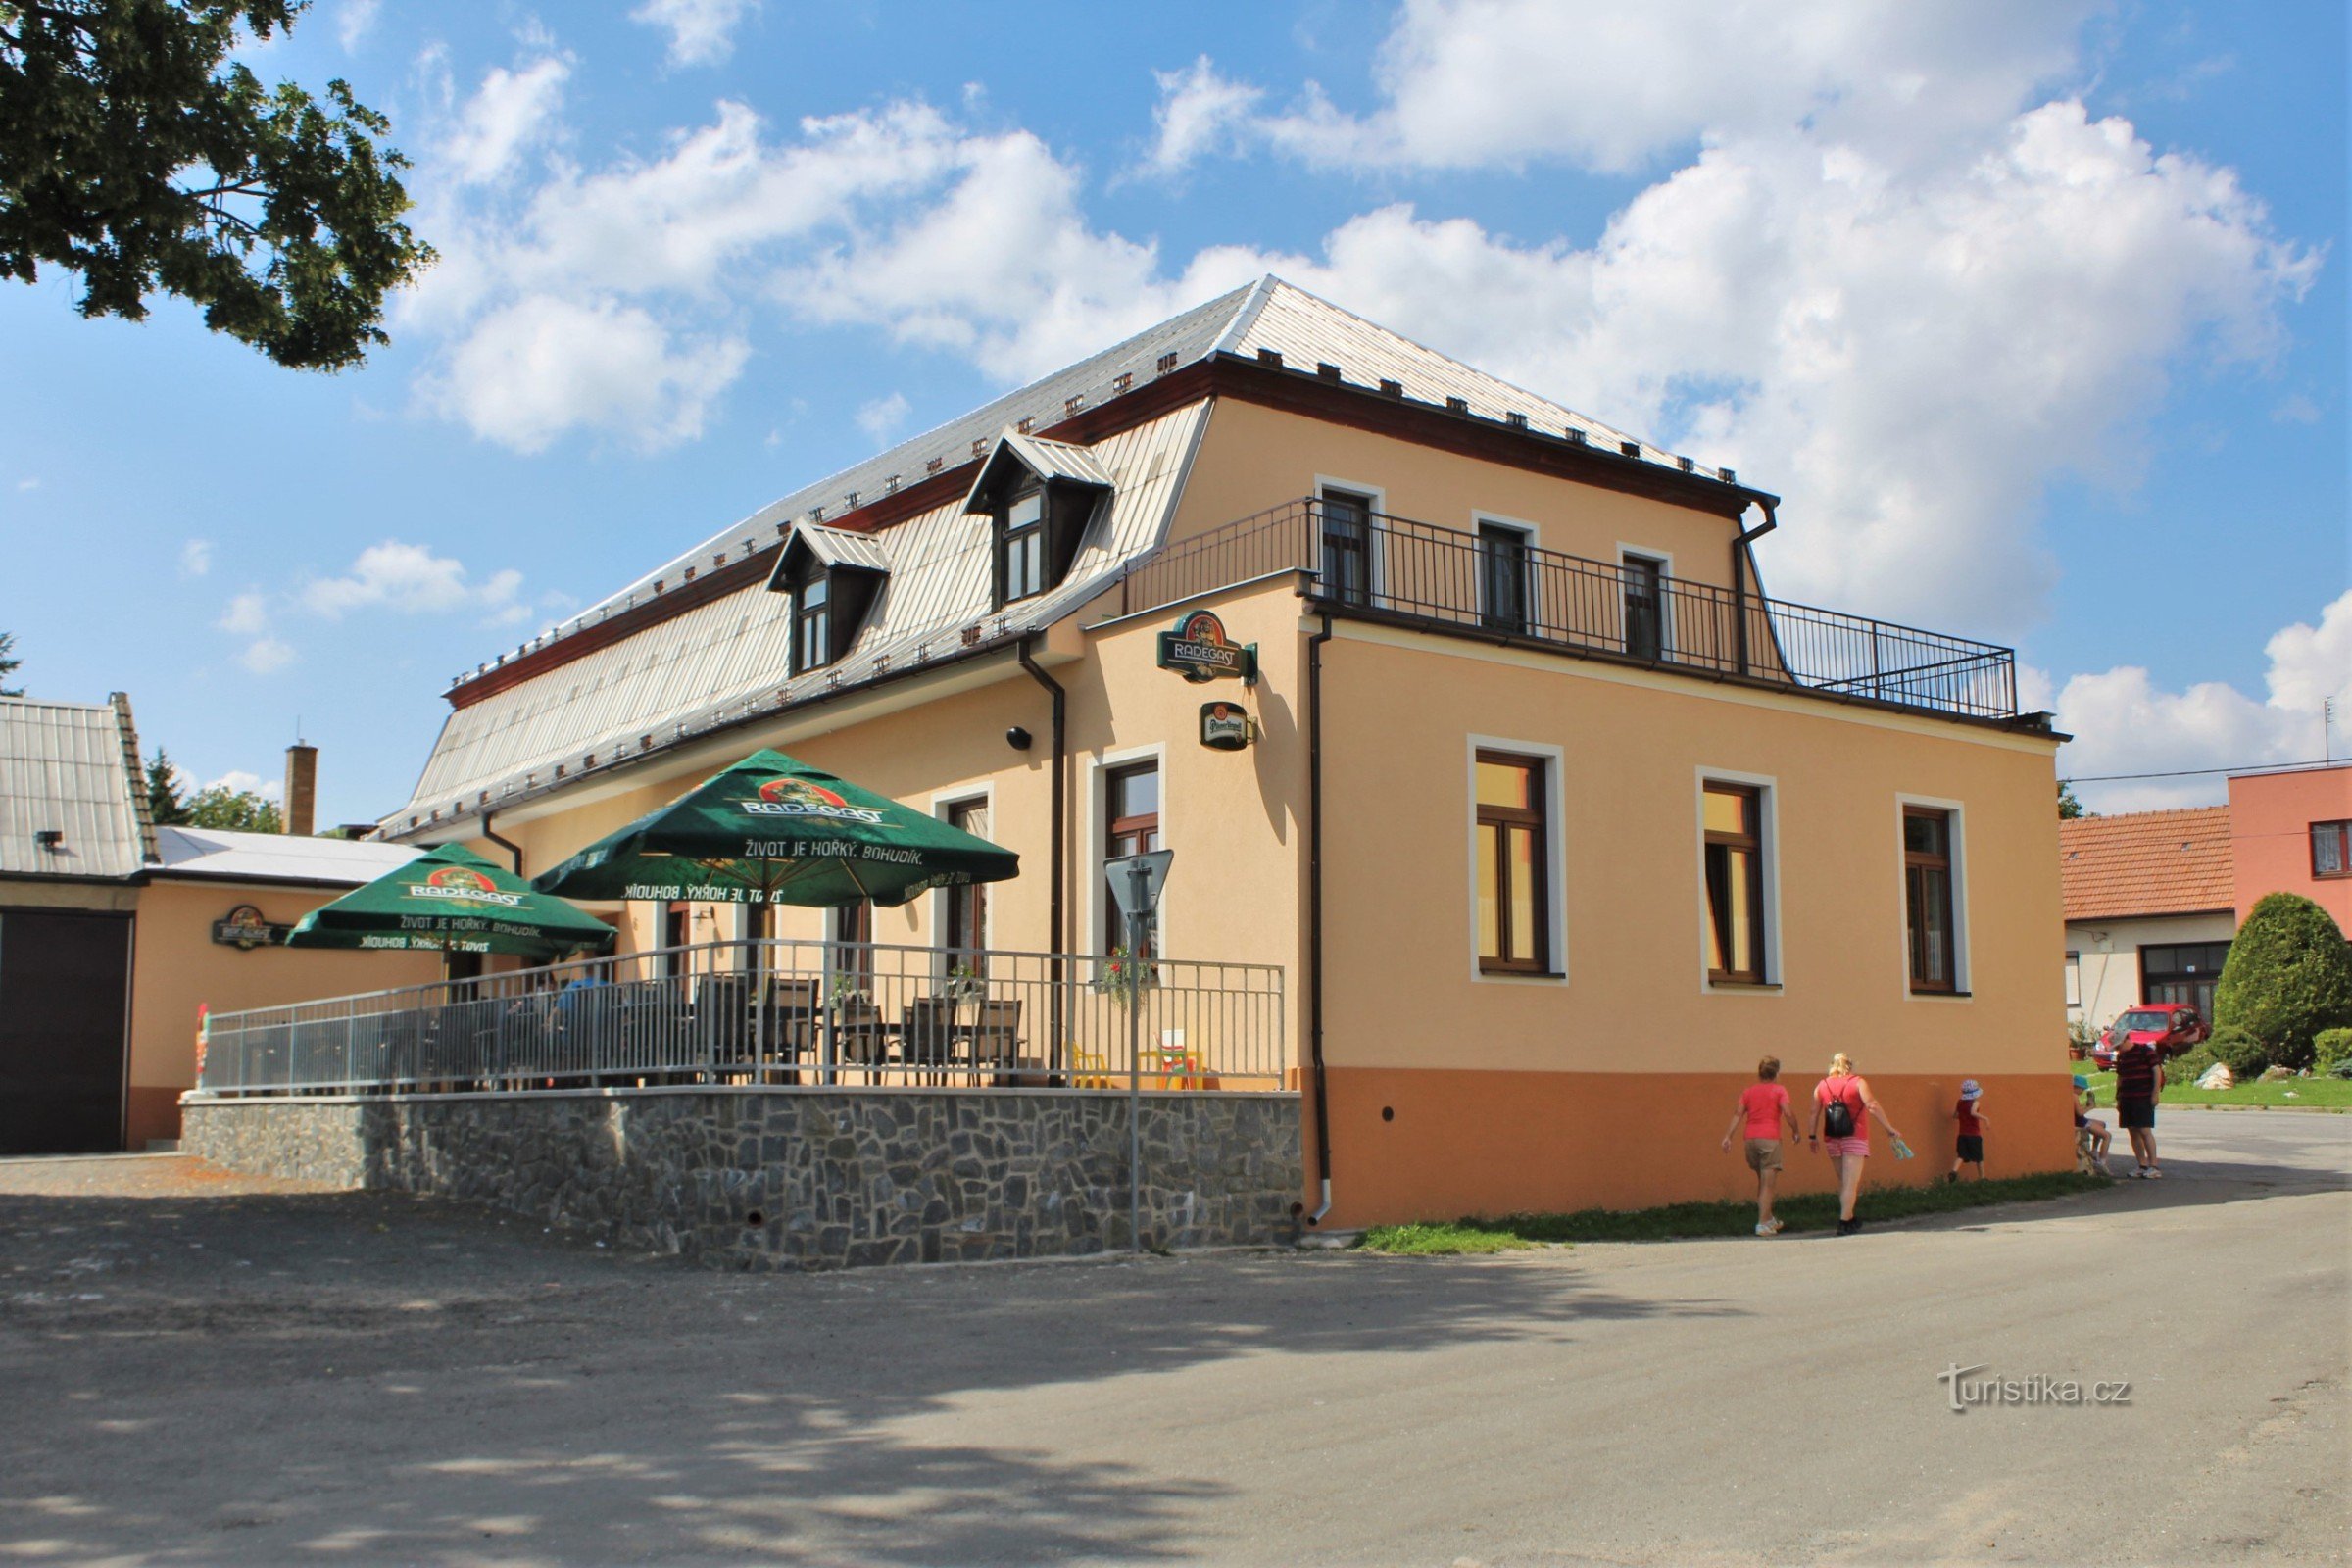 The Staré časy Inn provides all-day dining and also has a reception in the summer